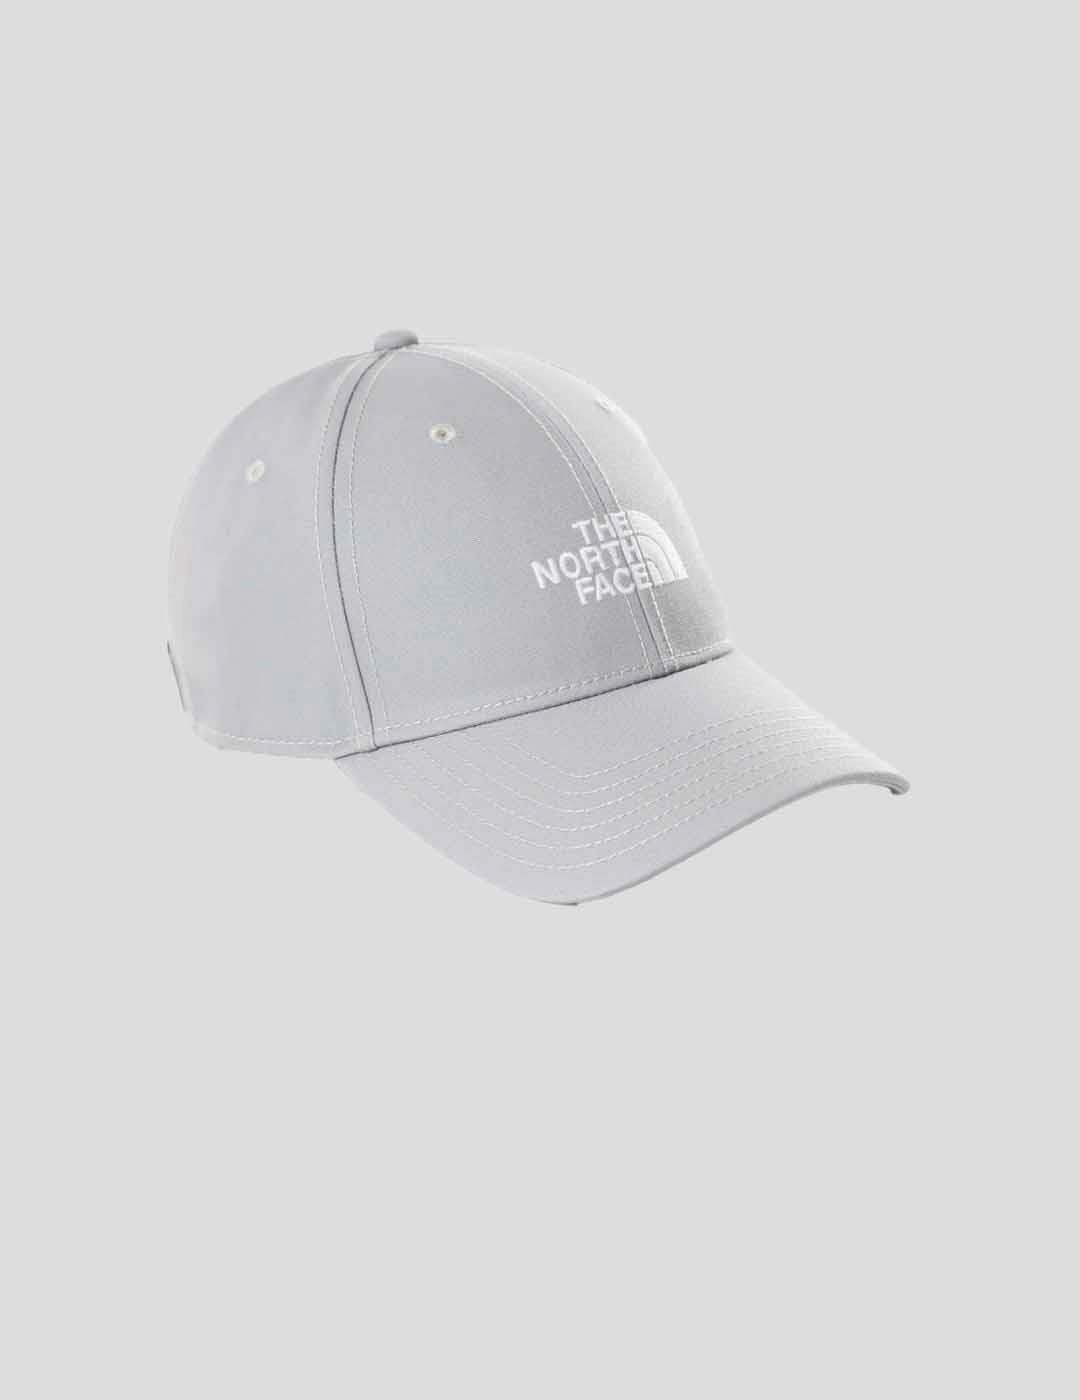 GORRA THE NORTH FACE RECYCLED 66 HAT MELD GREY